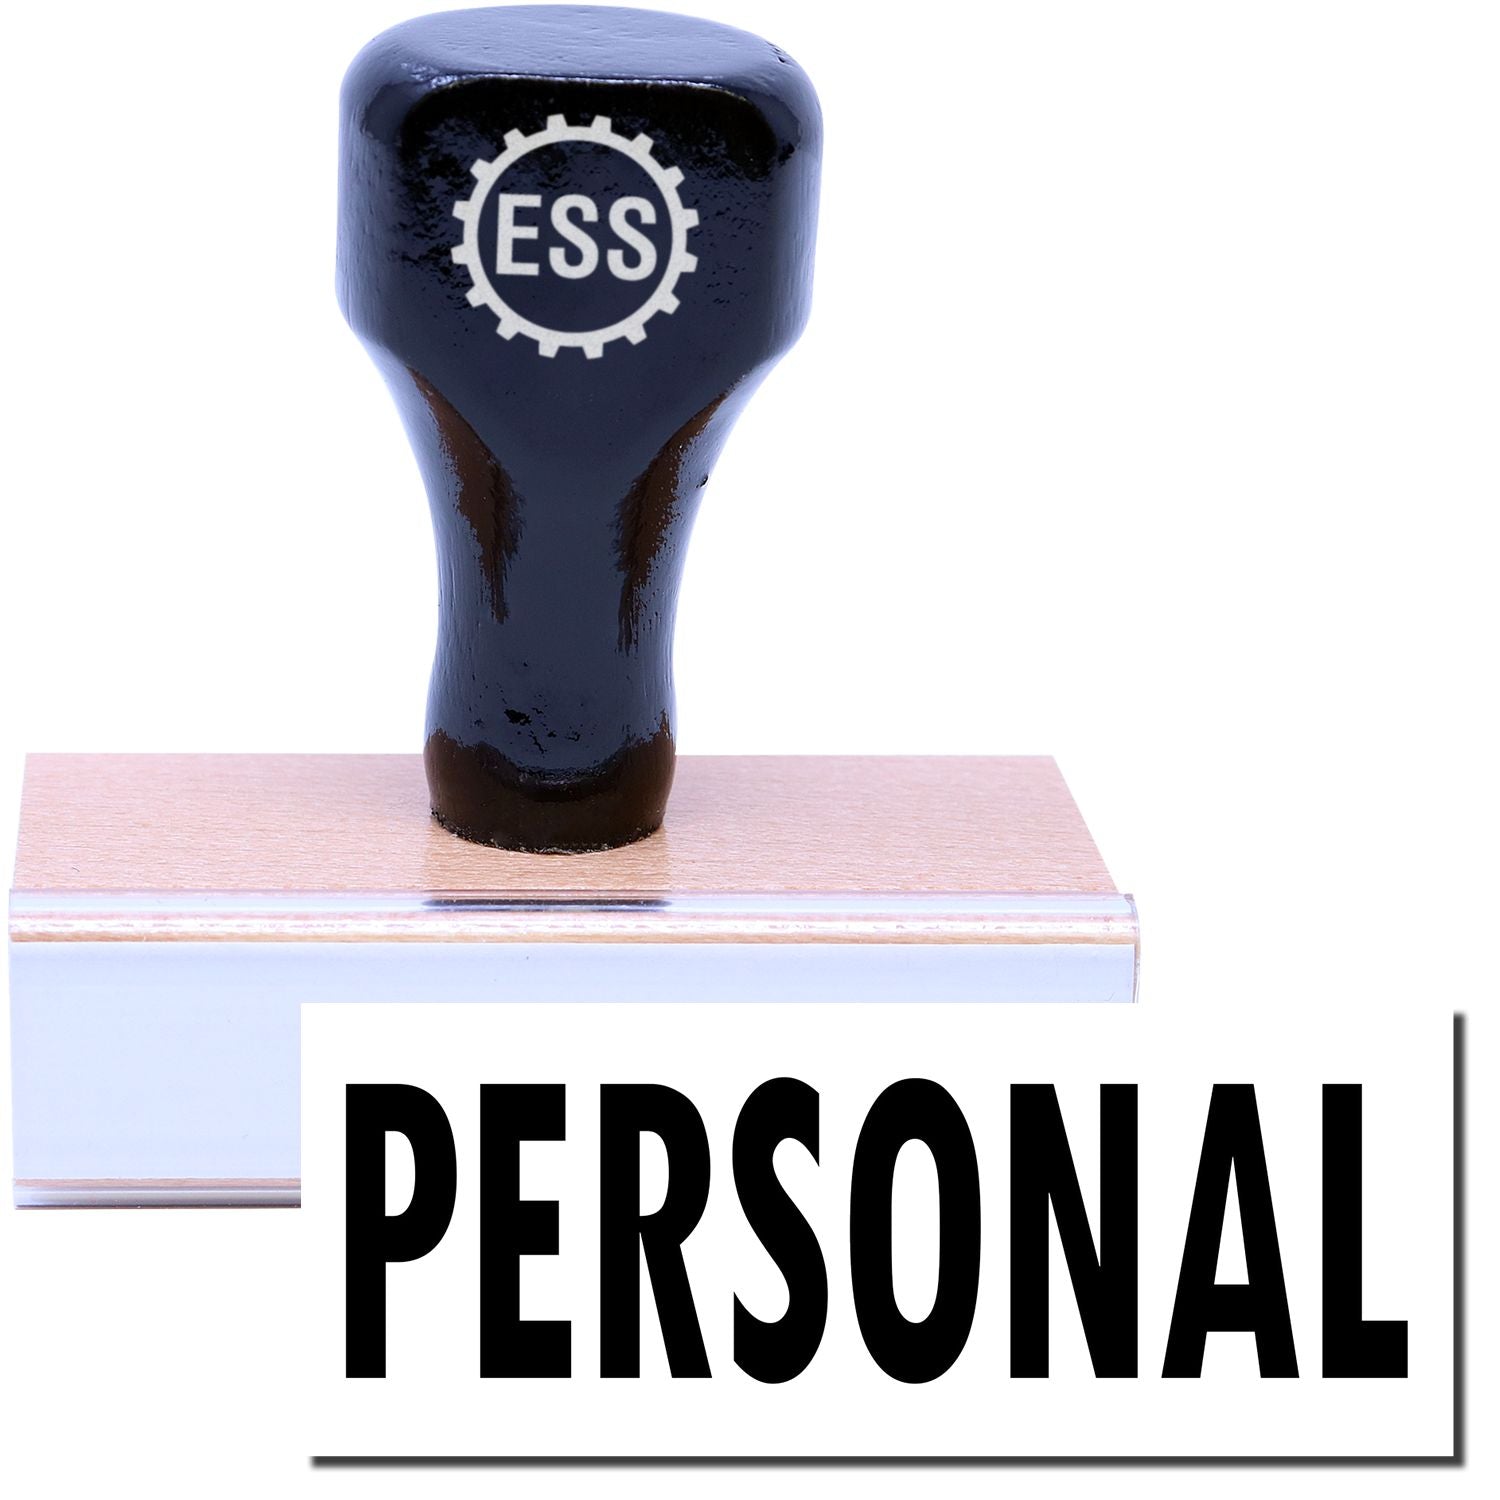 A stock office rubber stamp with a stamped image showing how the text "PERSONAL" in a large font is displayed after stamping.